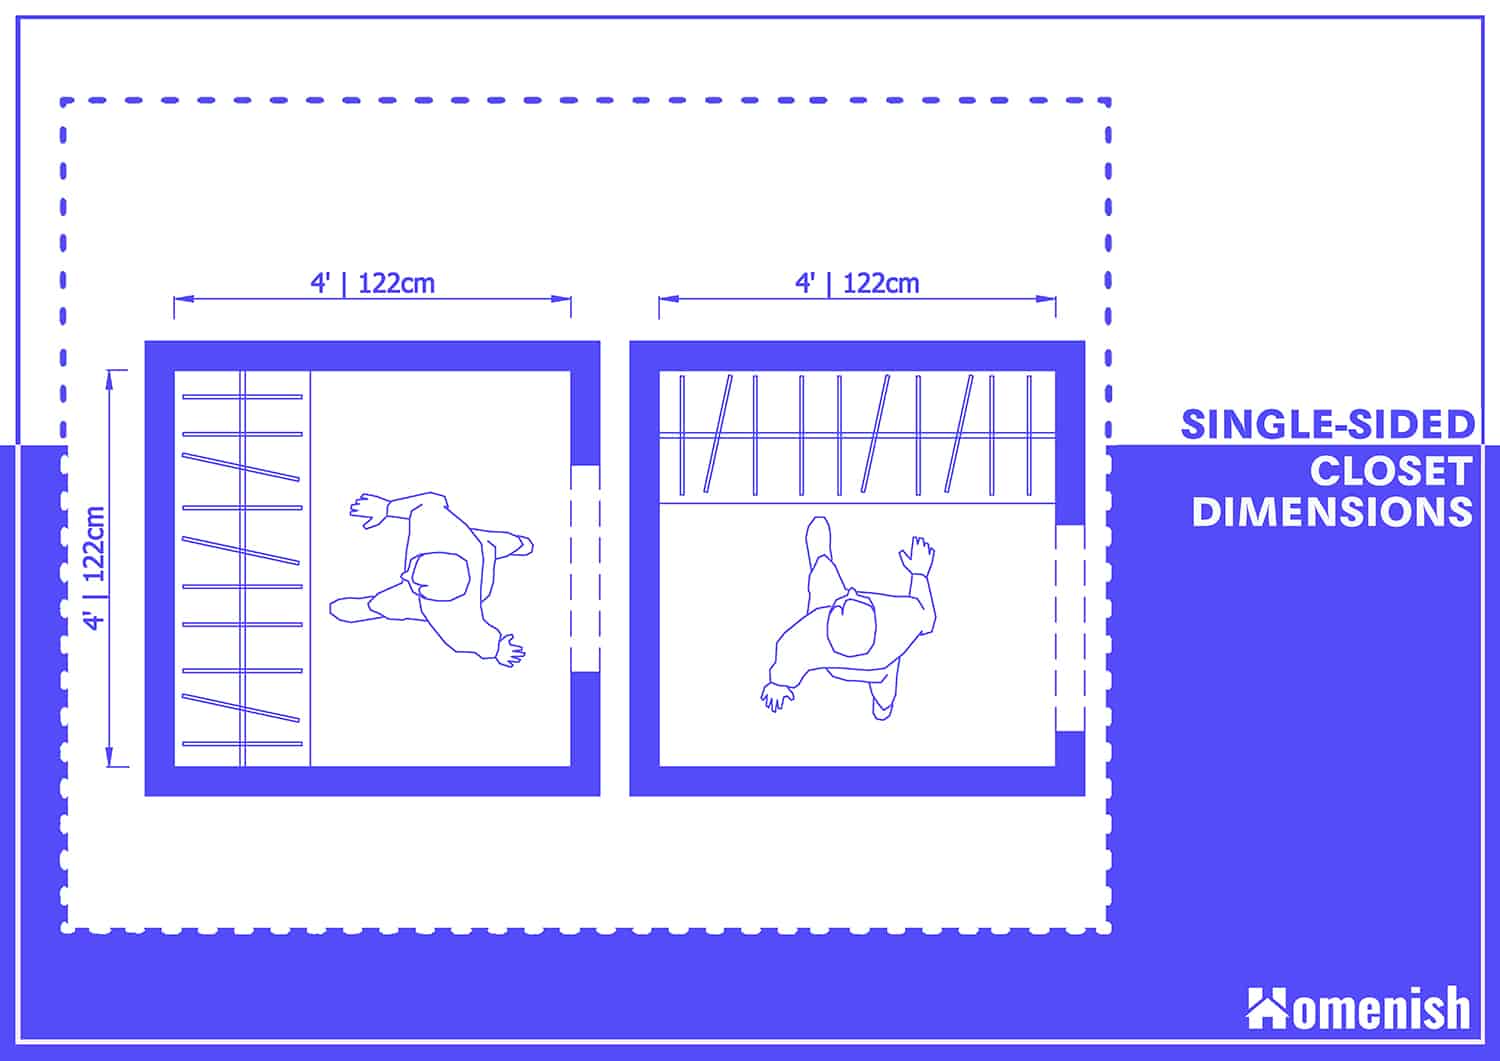 Single-Sided Closet Dimensions